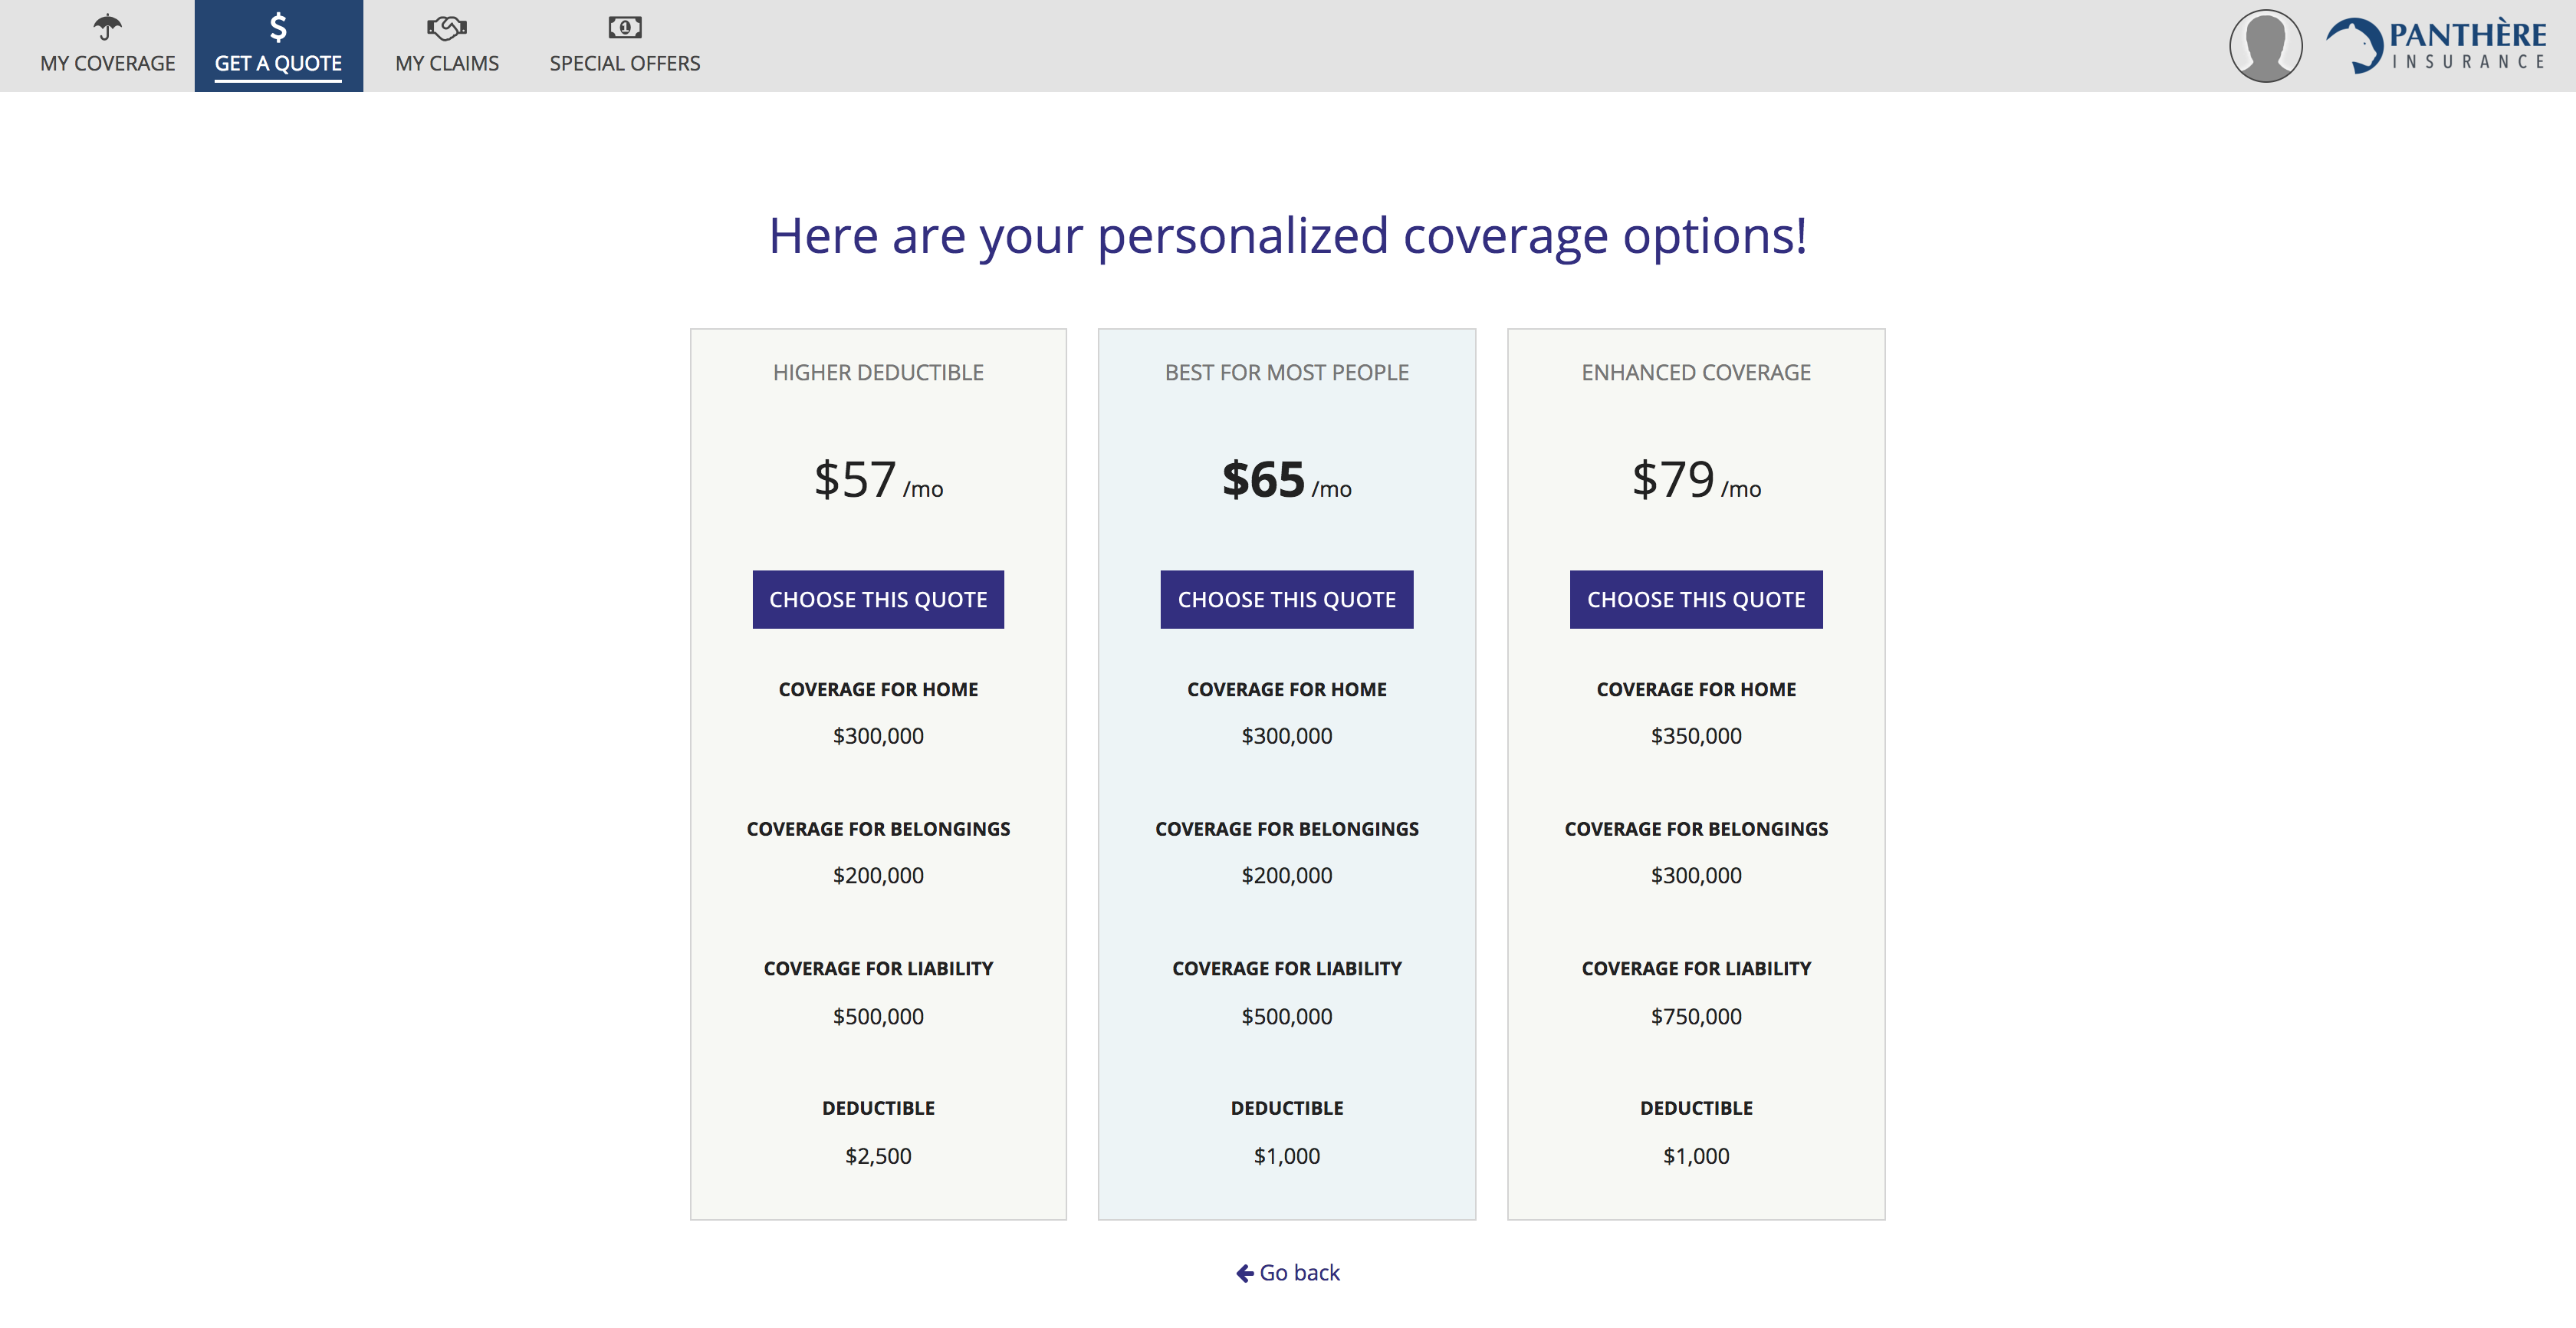 ds-images/ux_pages/insurance_5.png